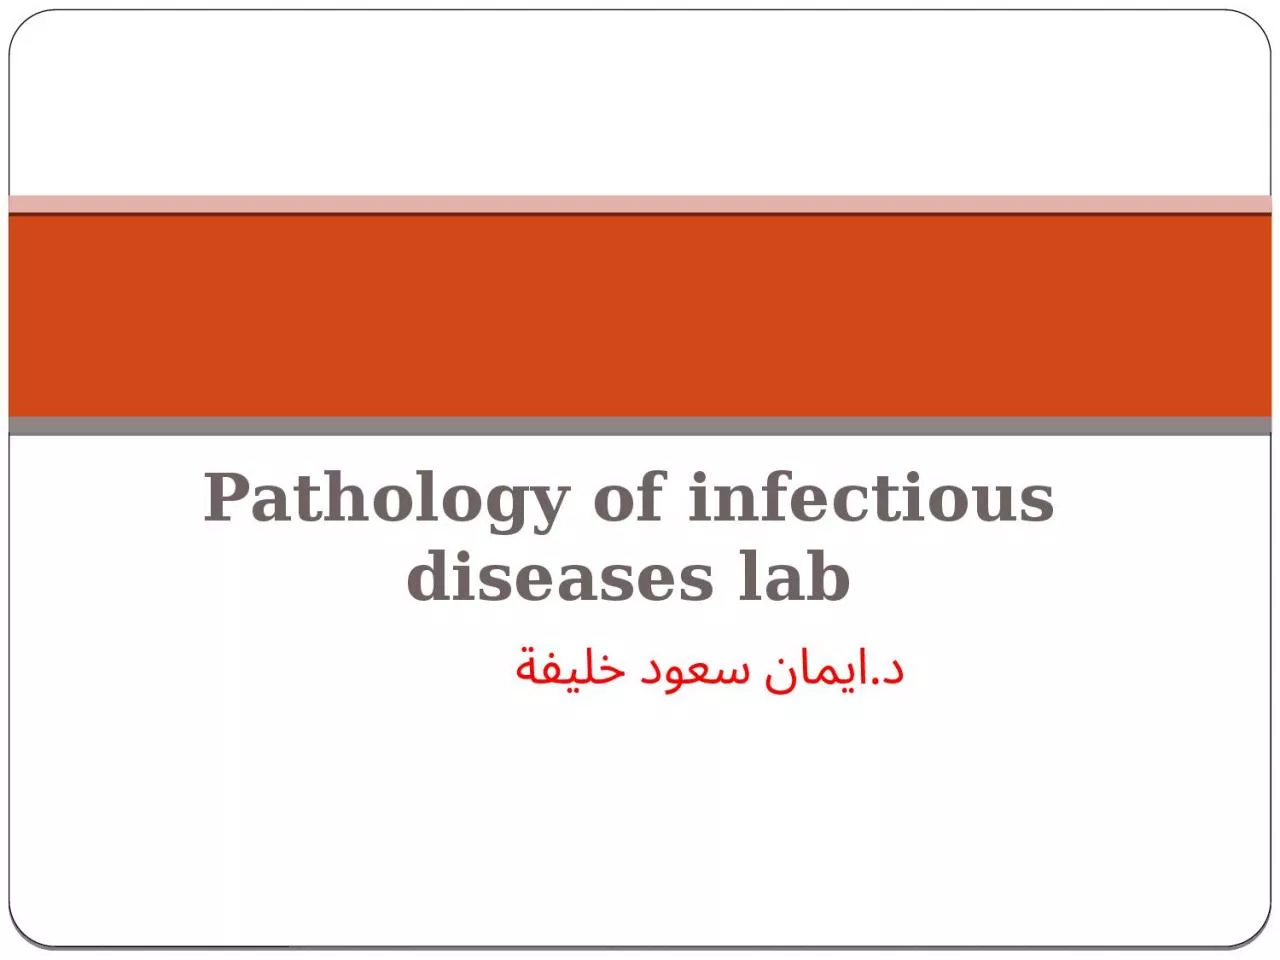 Pathology of infectious diseases lab